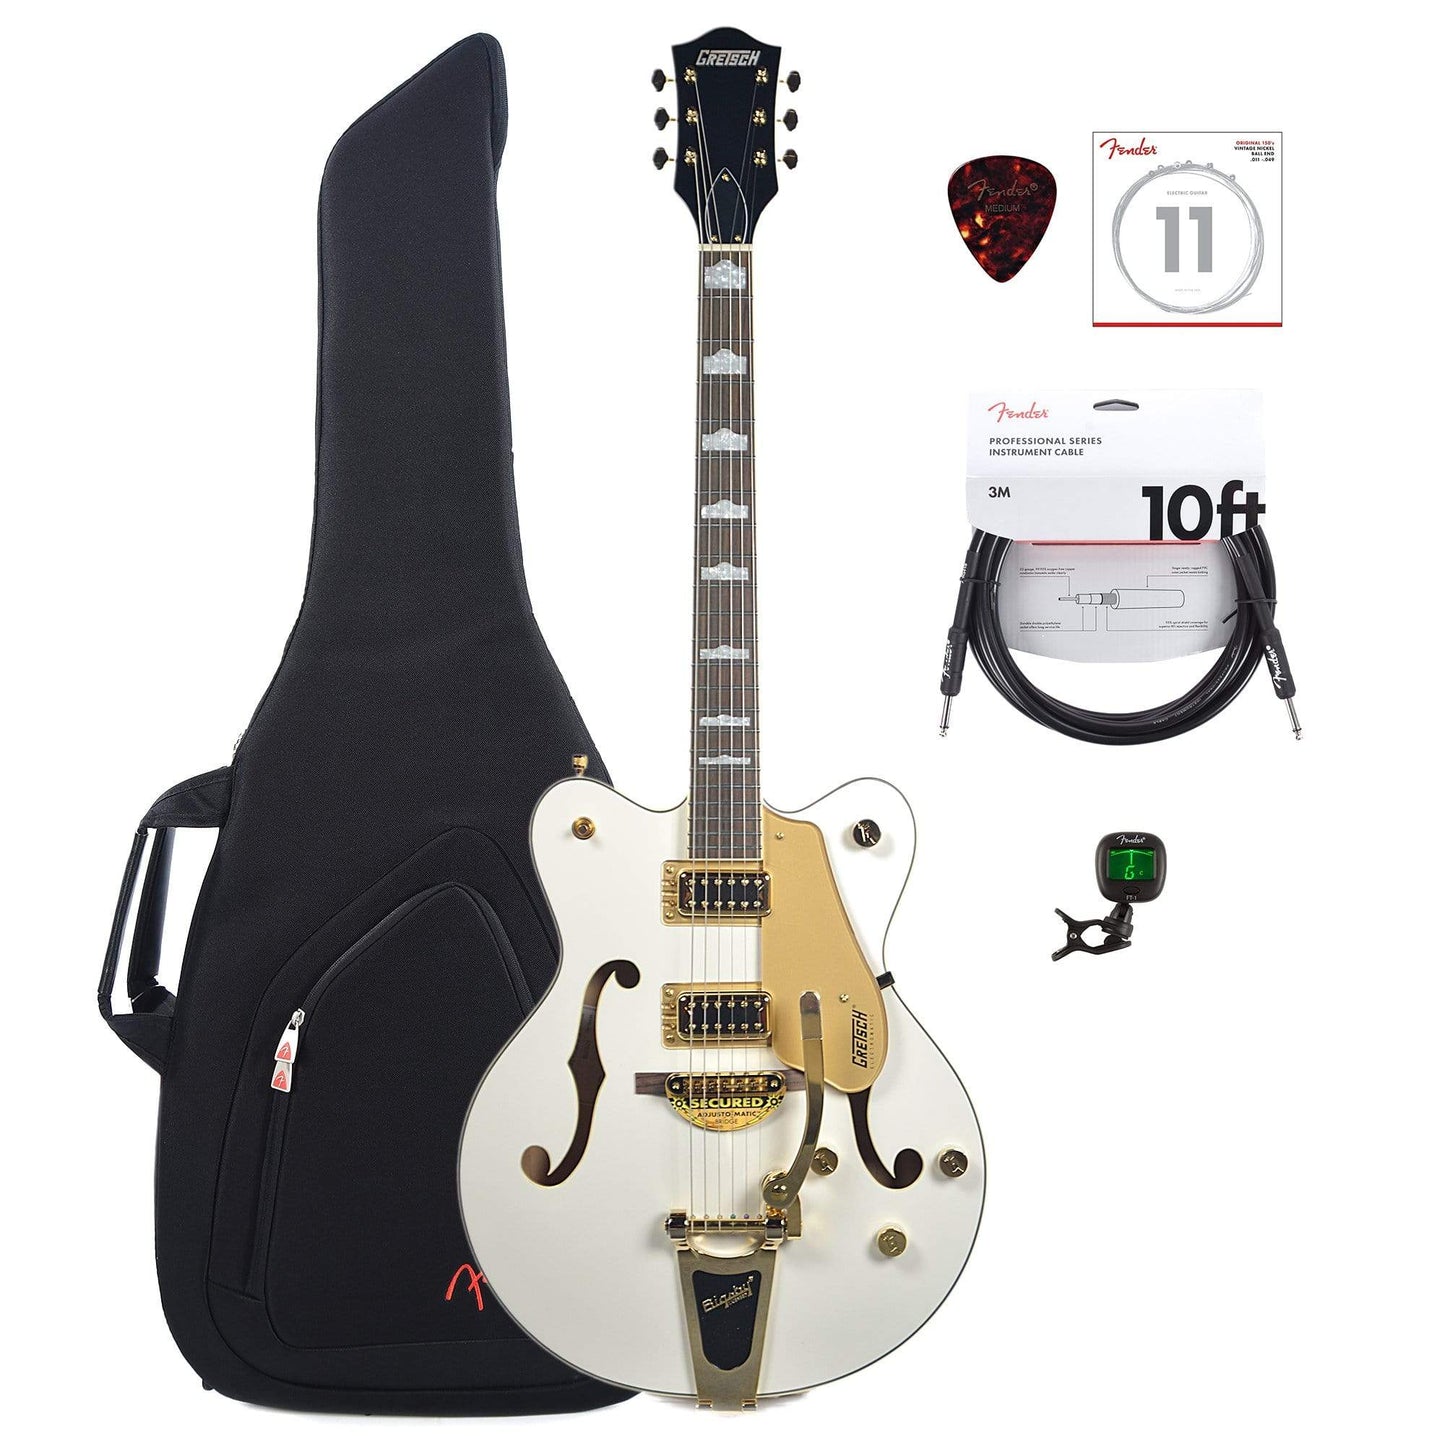 Gretsch G5422TG Electromatic Hollow Body with Bigsby Double-cut Snowcrest White with Gold hardware w/Gig Bag, Tuner, (1) Cable, Picks and Strings Bundle Electric Guitars / Hollow Body